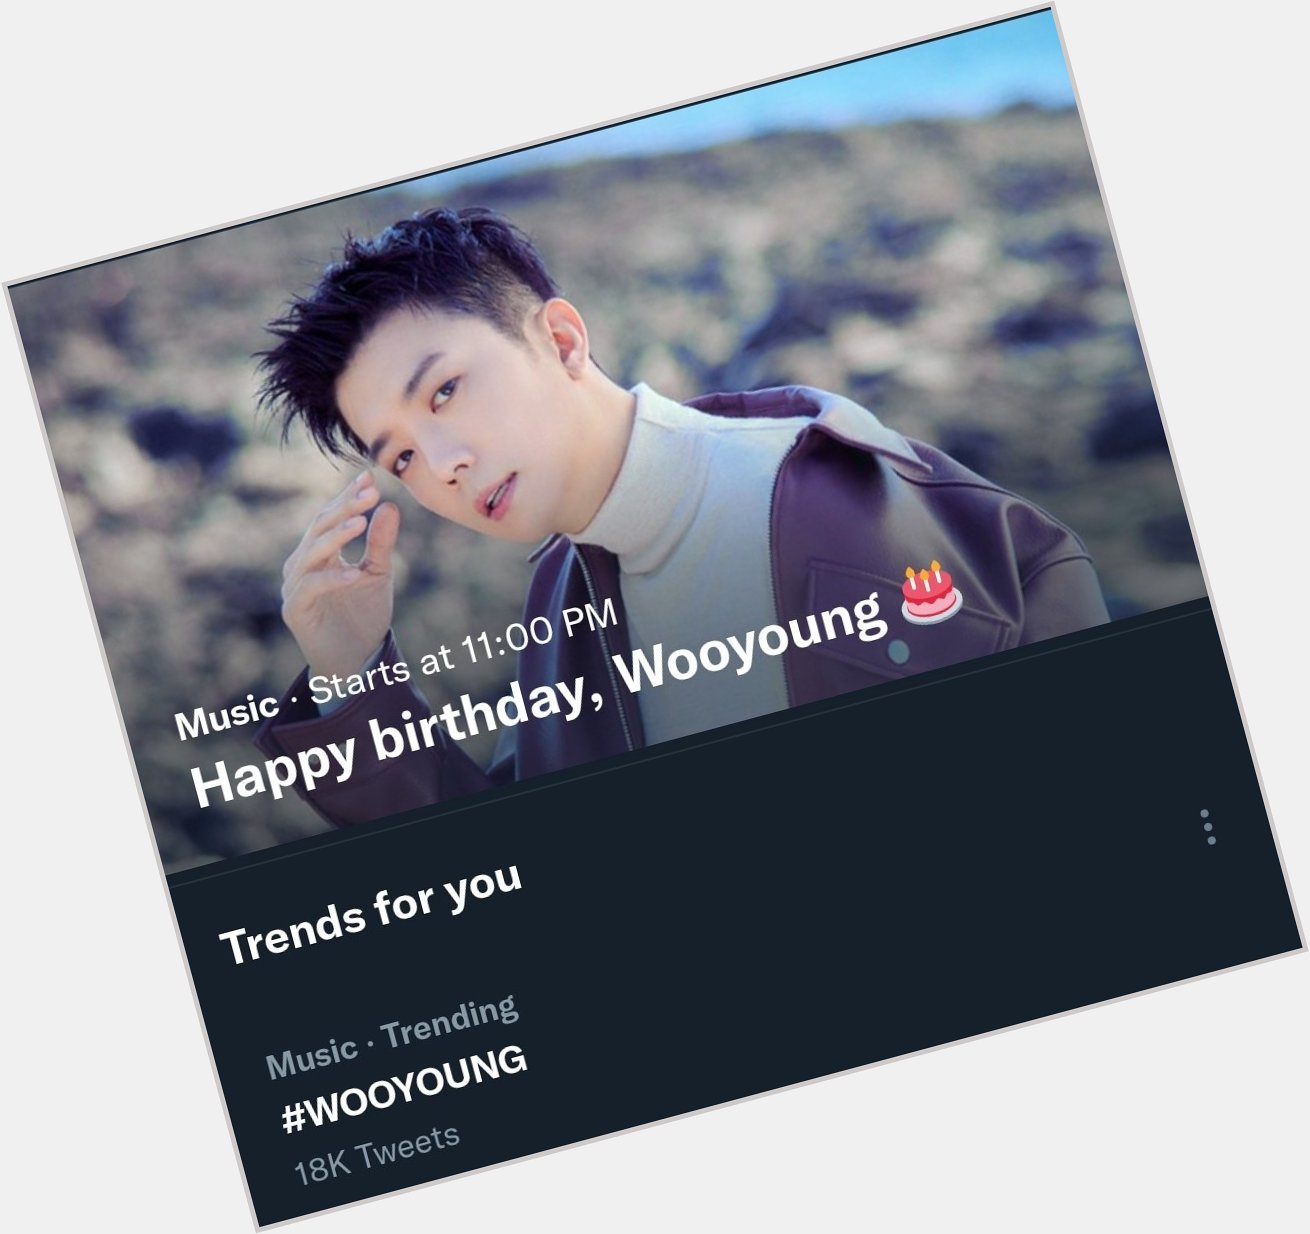 Once again happy birthday my vitamin\s  Jang Wooyoung!!!!      !!!  